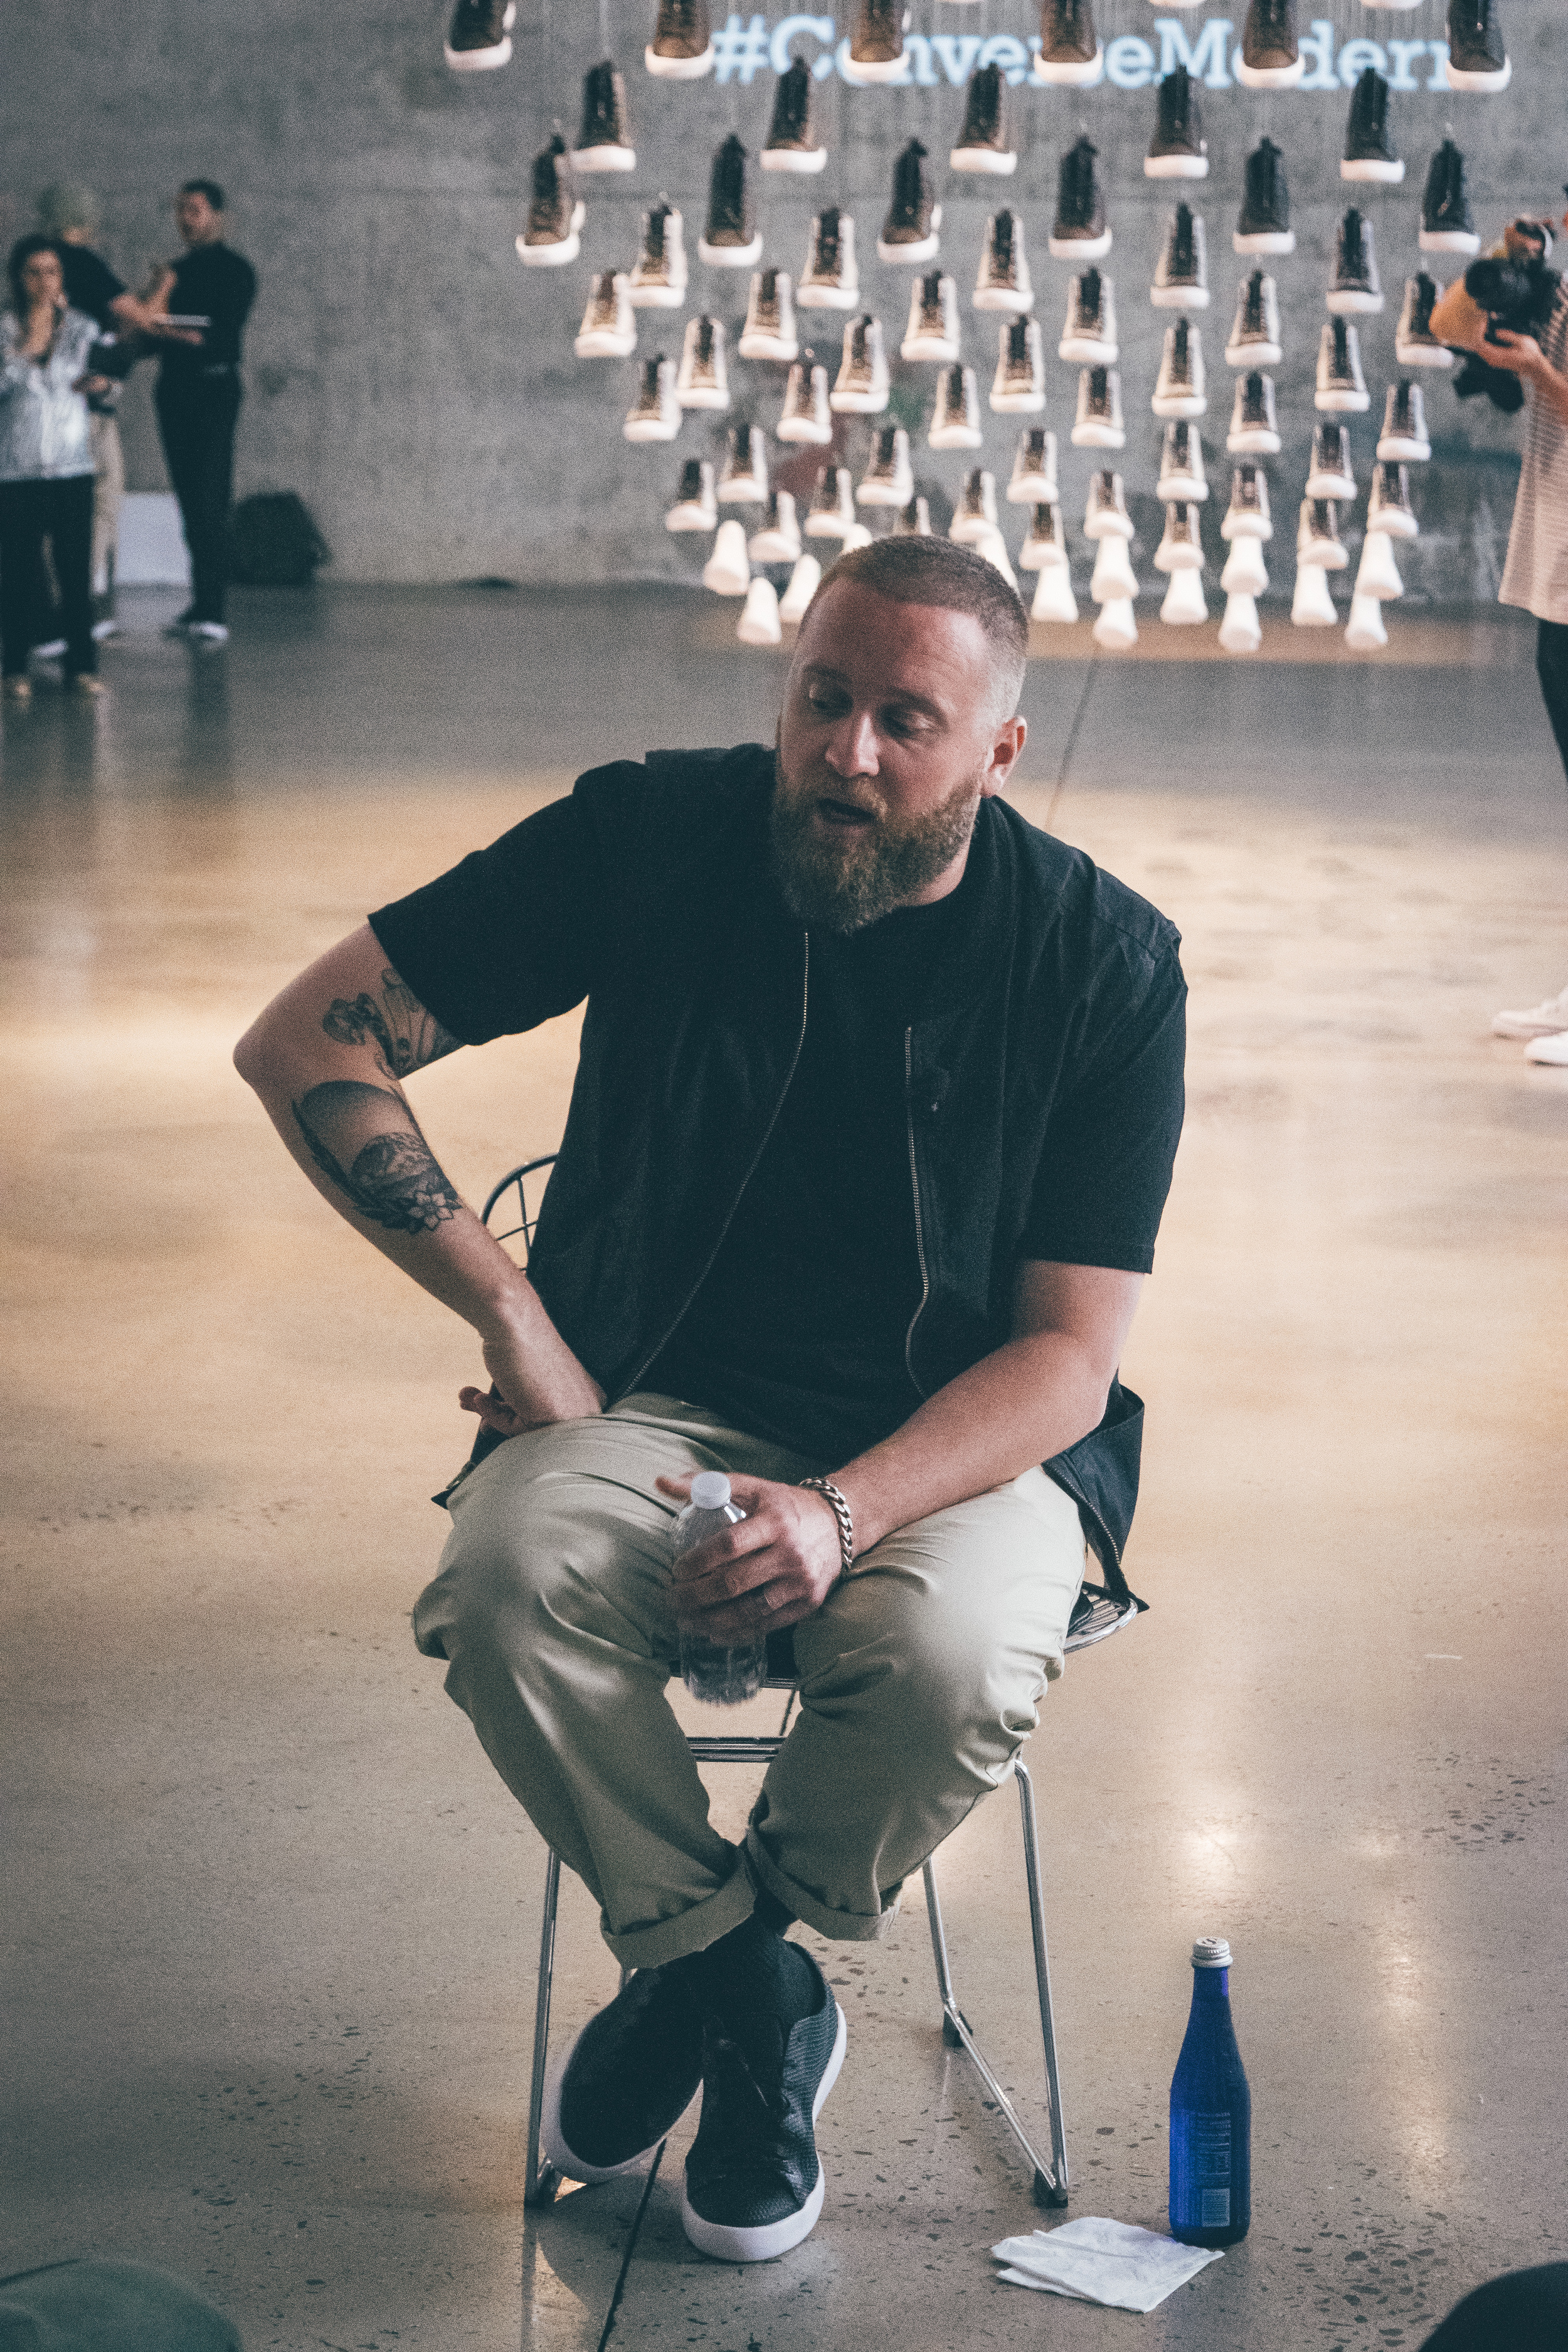  Converse unveils All Star Modern sneaker in NY. Pictured: Ryan Case, gobal product director of Converse Inc . / Photo: ©&nbsp;Nabil Miftahi for SUSPEND Magazine 